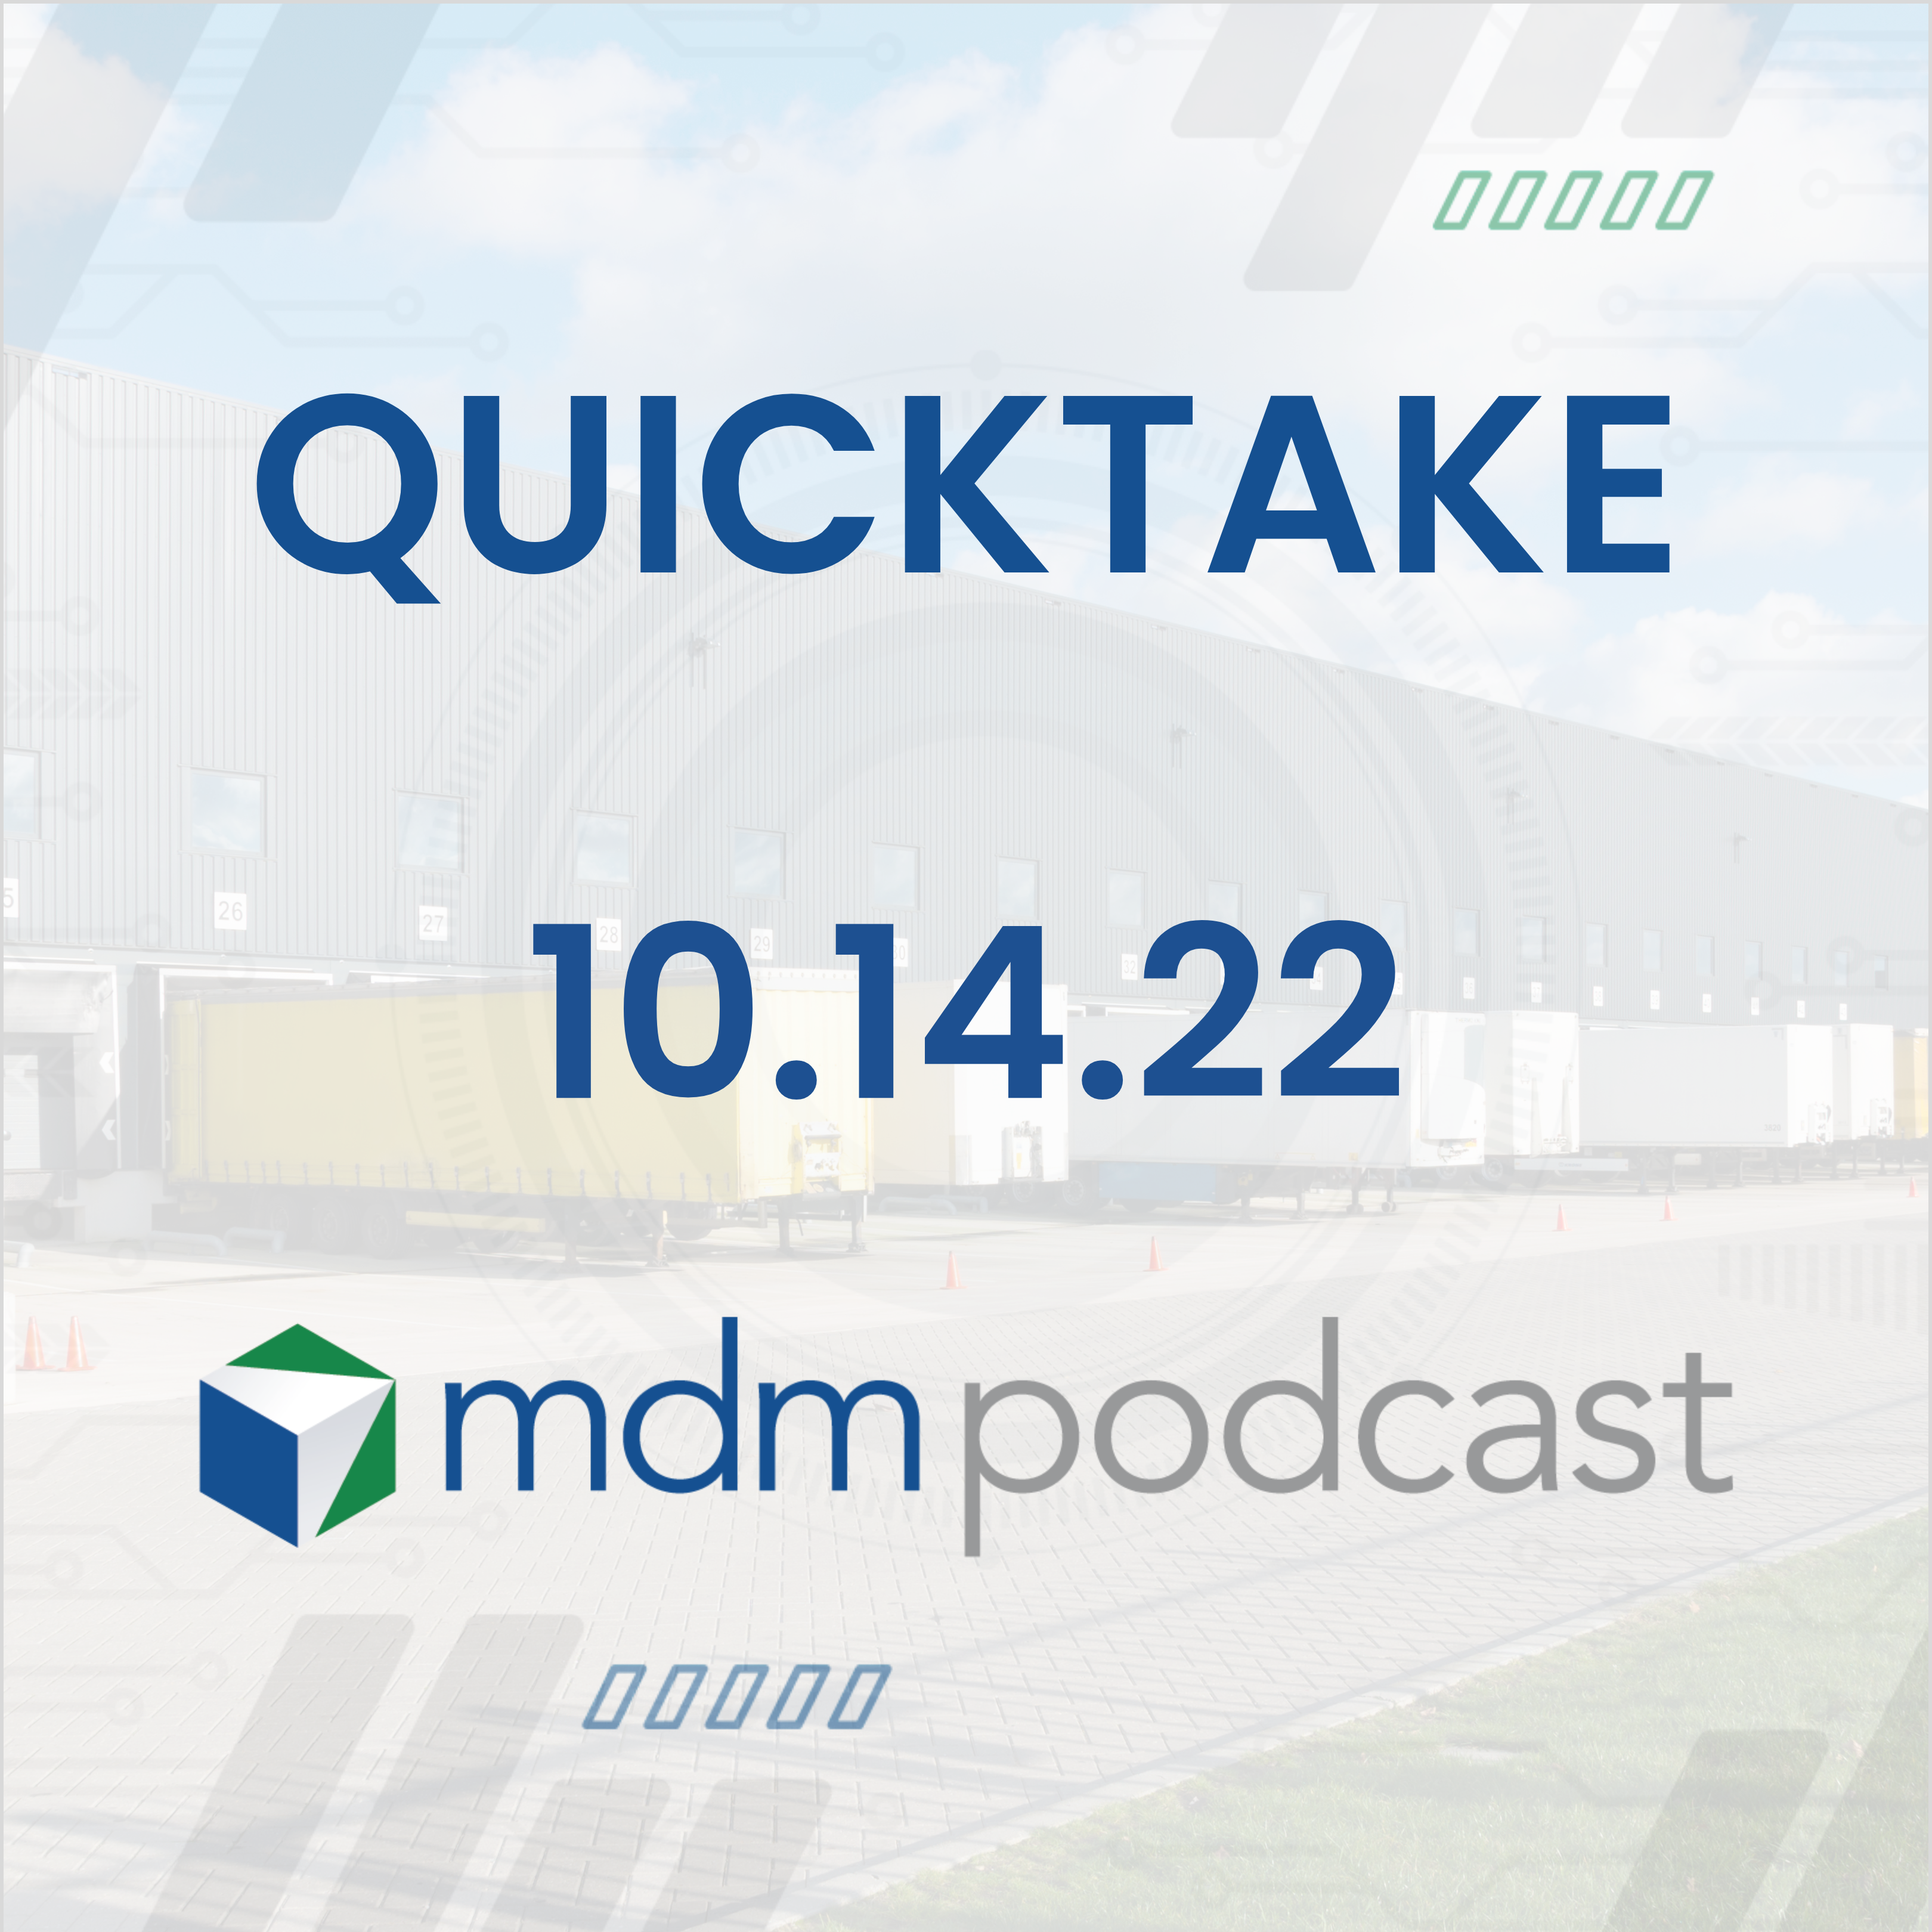 Quicktake 10.14.22: Mixed Signals, Full Speed Ahead